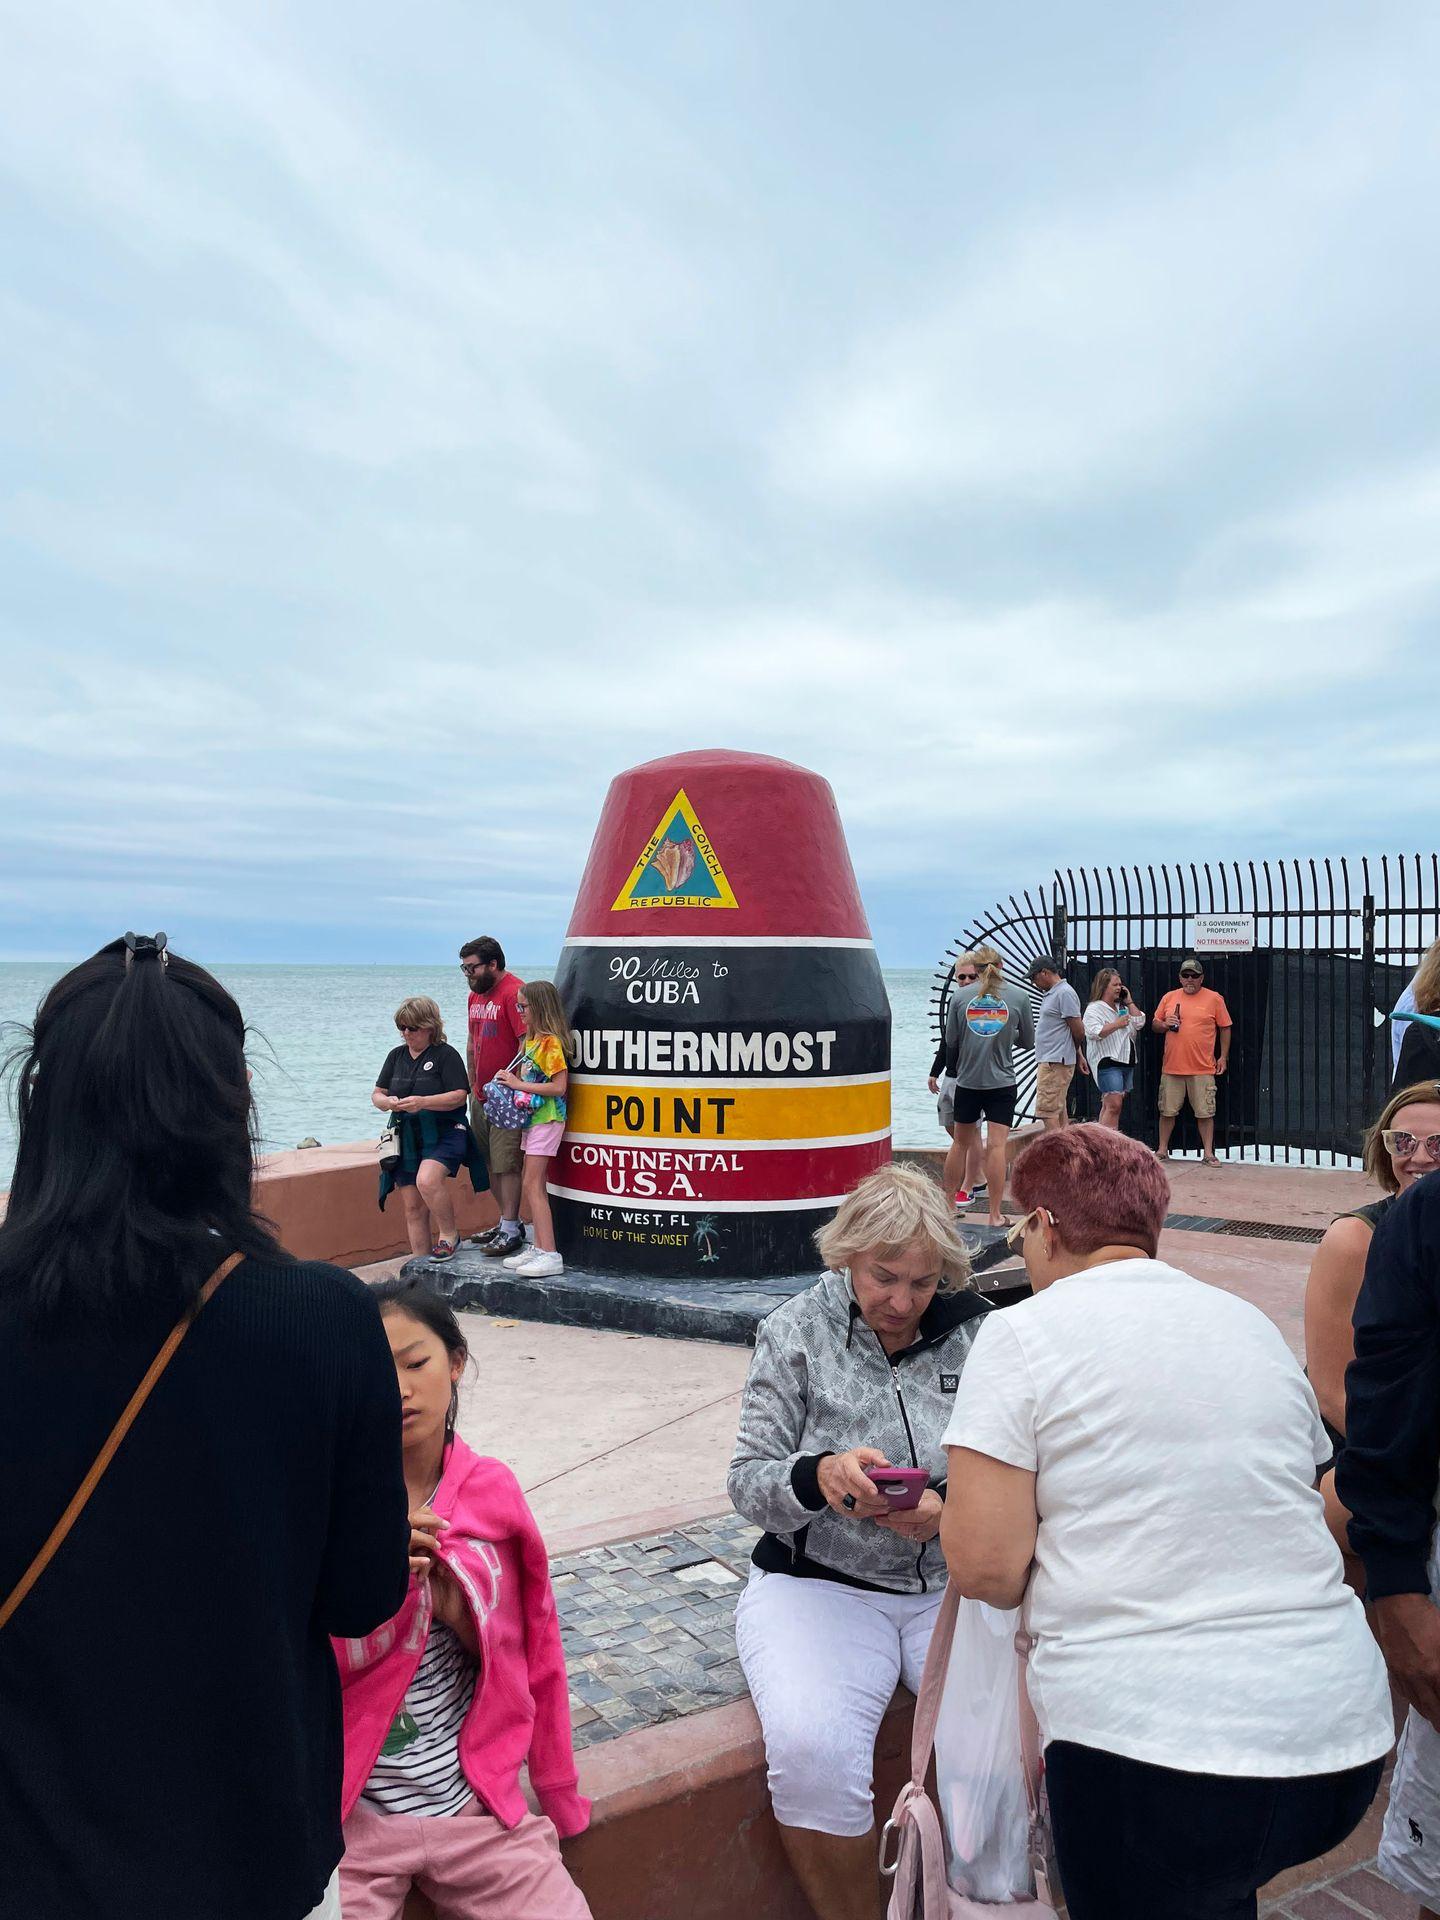 The southernmost buoy in Key West surrounded by a crowd of people